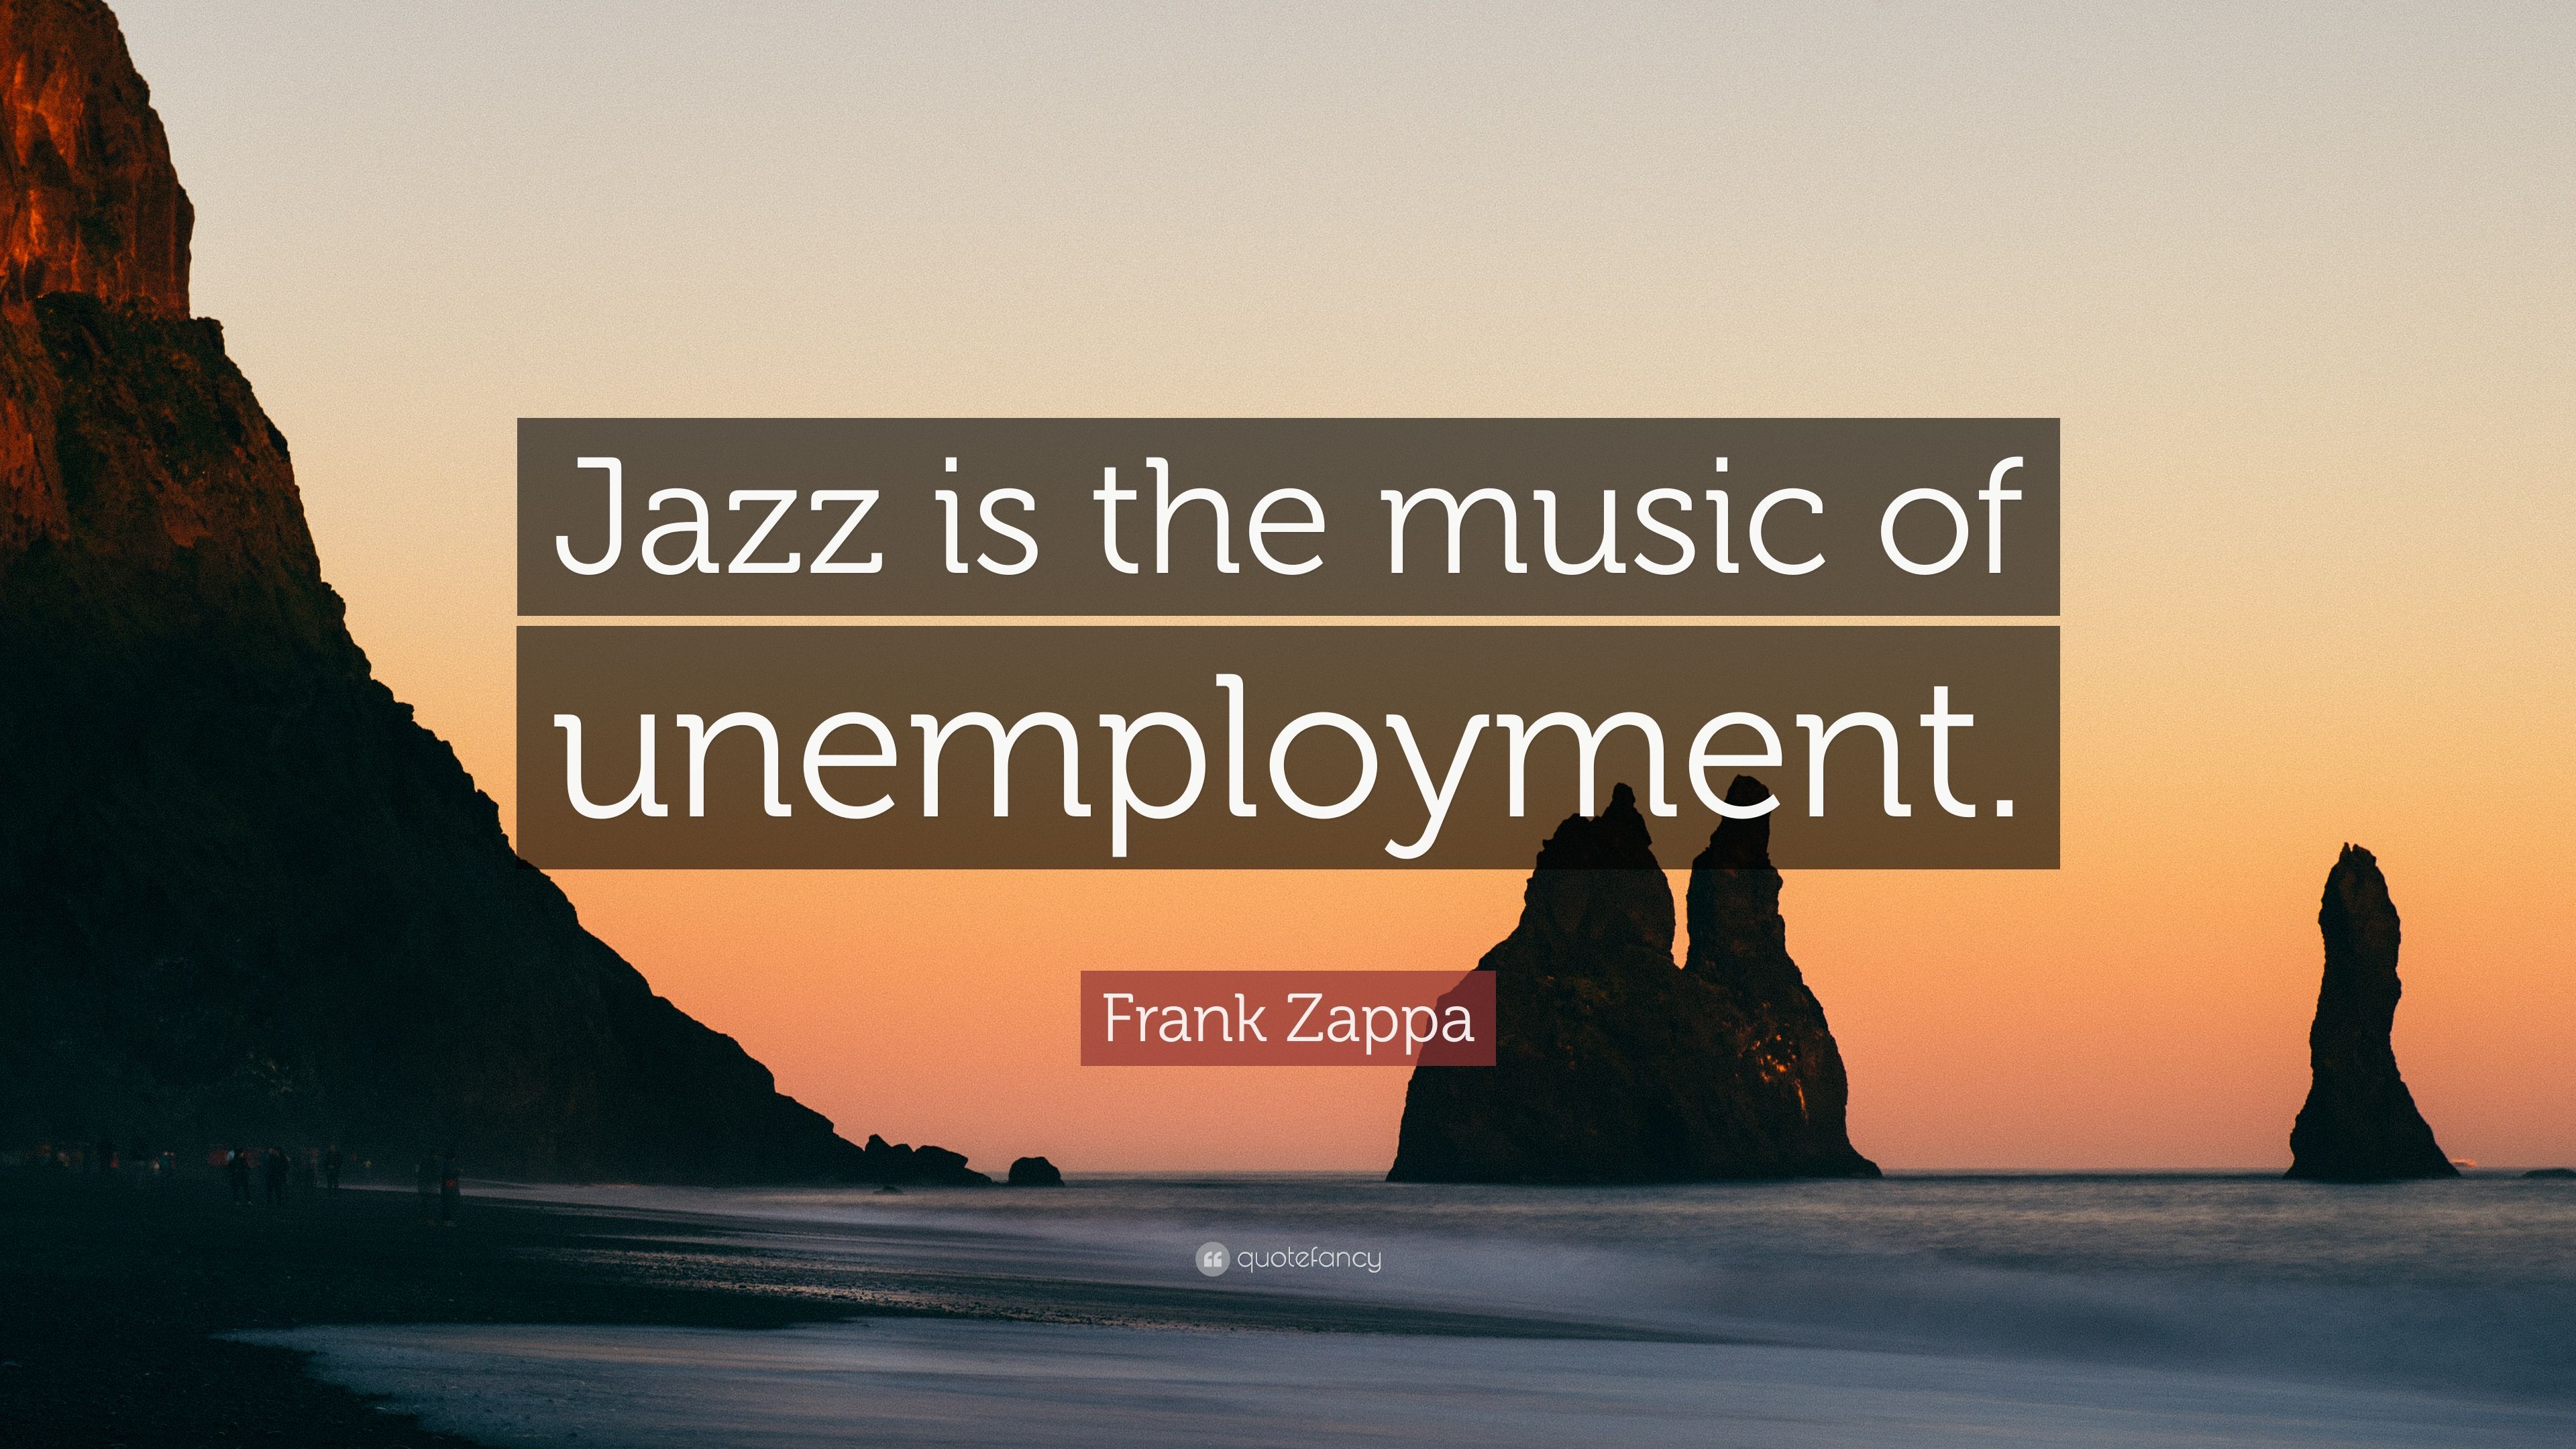 Frank Zappa Quote: “Jazz is the music of unemployment.” (7 wallpaper)